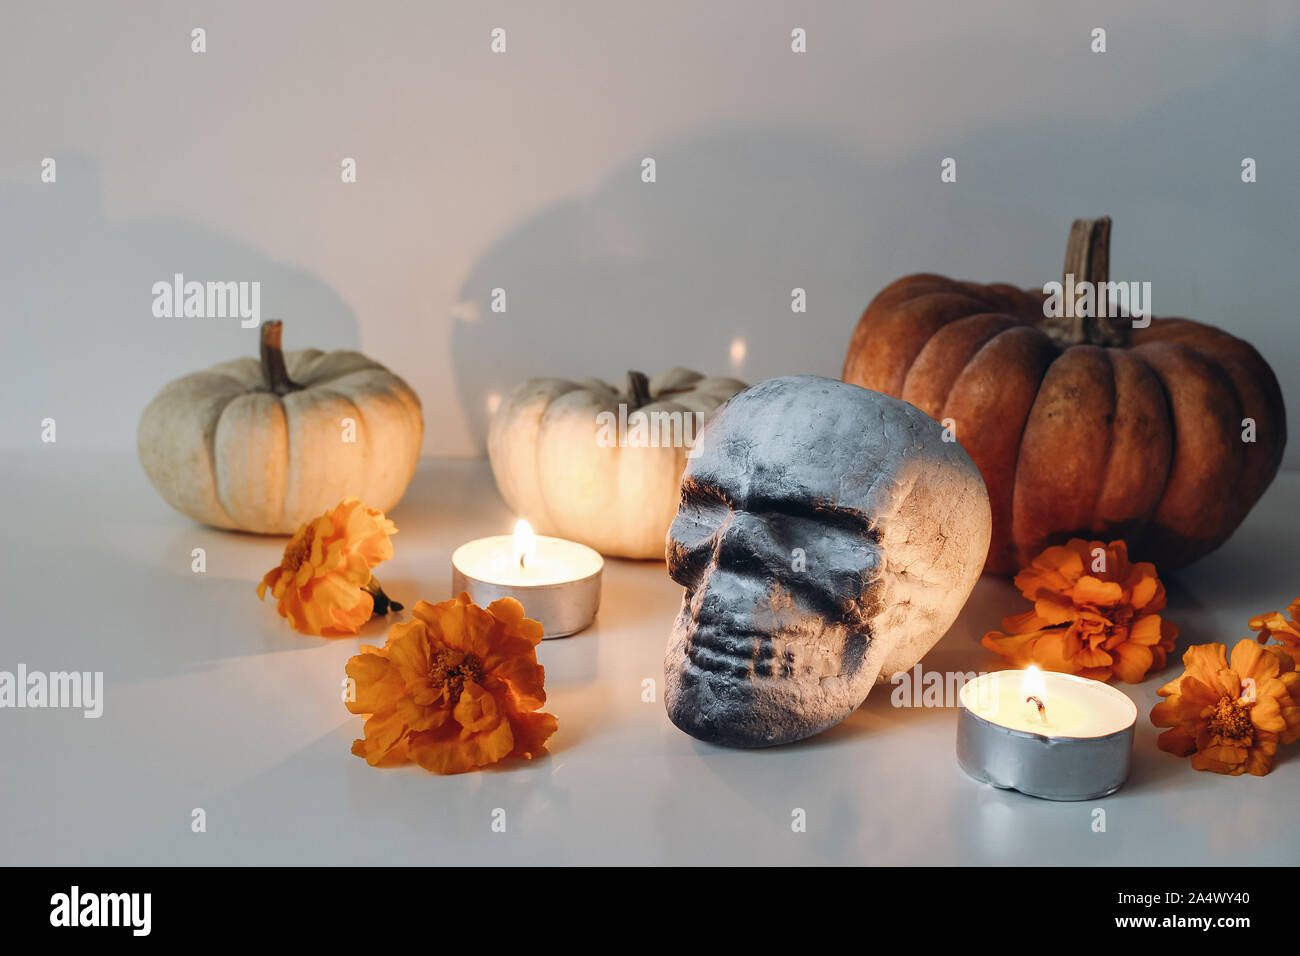 Dia de los Muertos, Mexican Day of the Dead table altar composition. Orange tagetes, marigold flowers and human artificial skull decoration. Burning Stock Photo